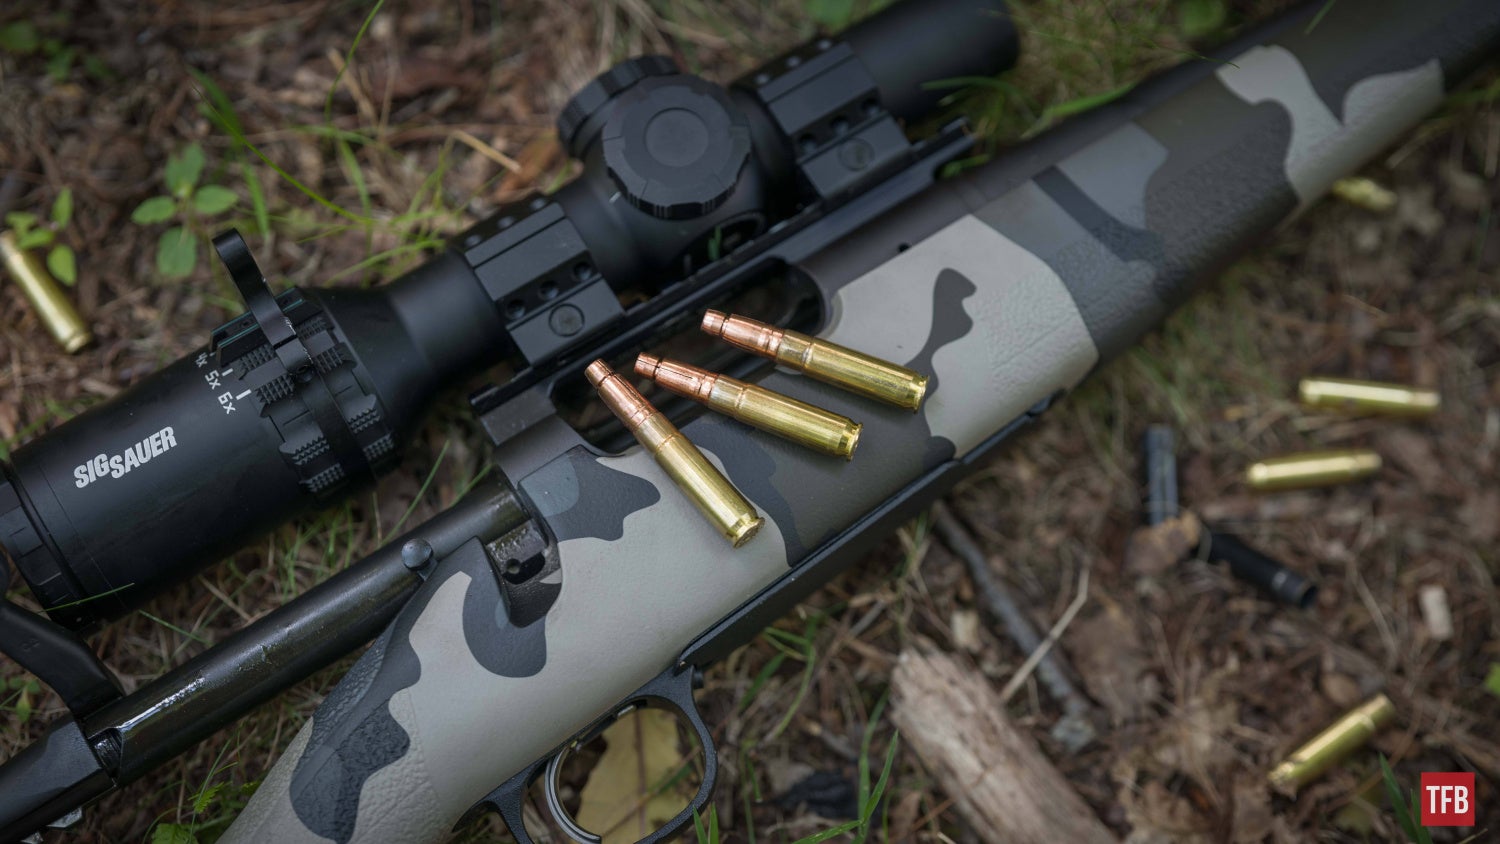 SILENCER SATURDAY #241: Be Very Quiet, We’re Hunting With the SilencerCo Harvester Evo 